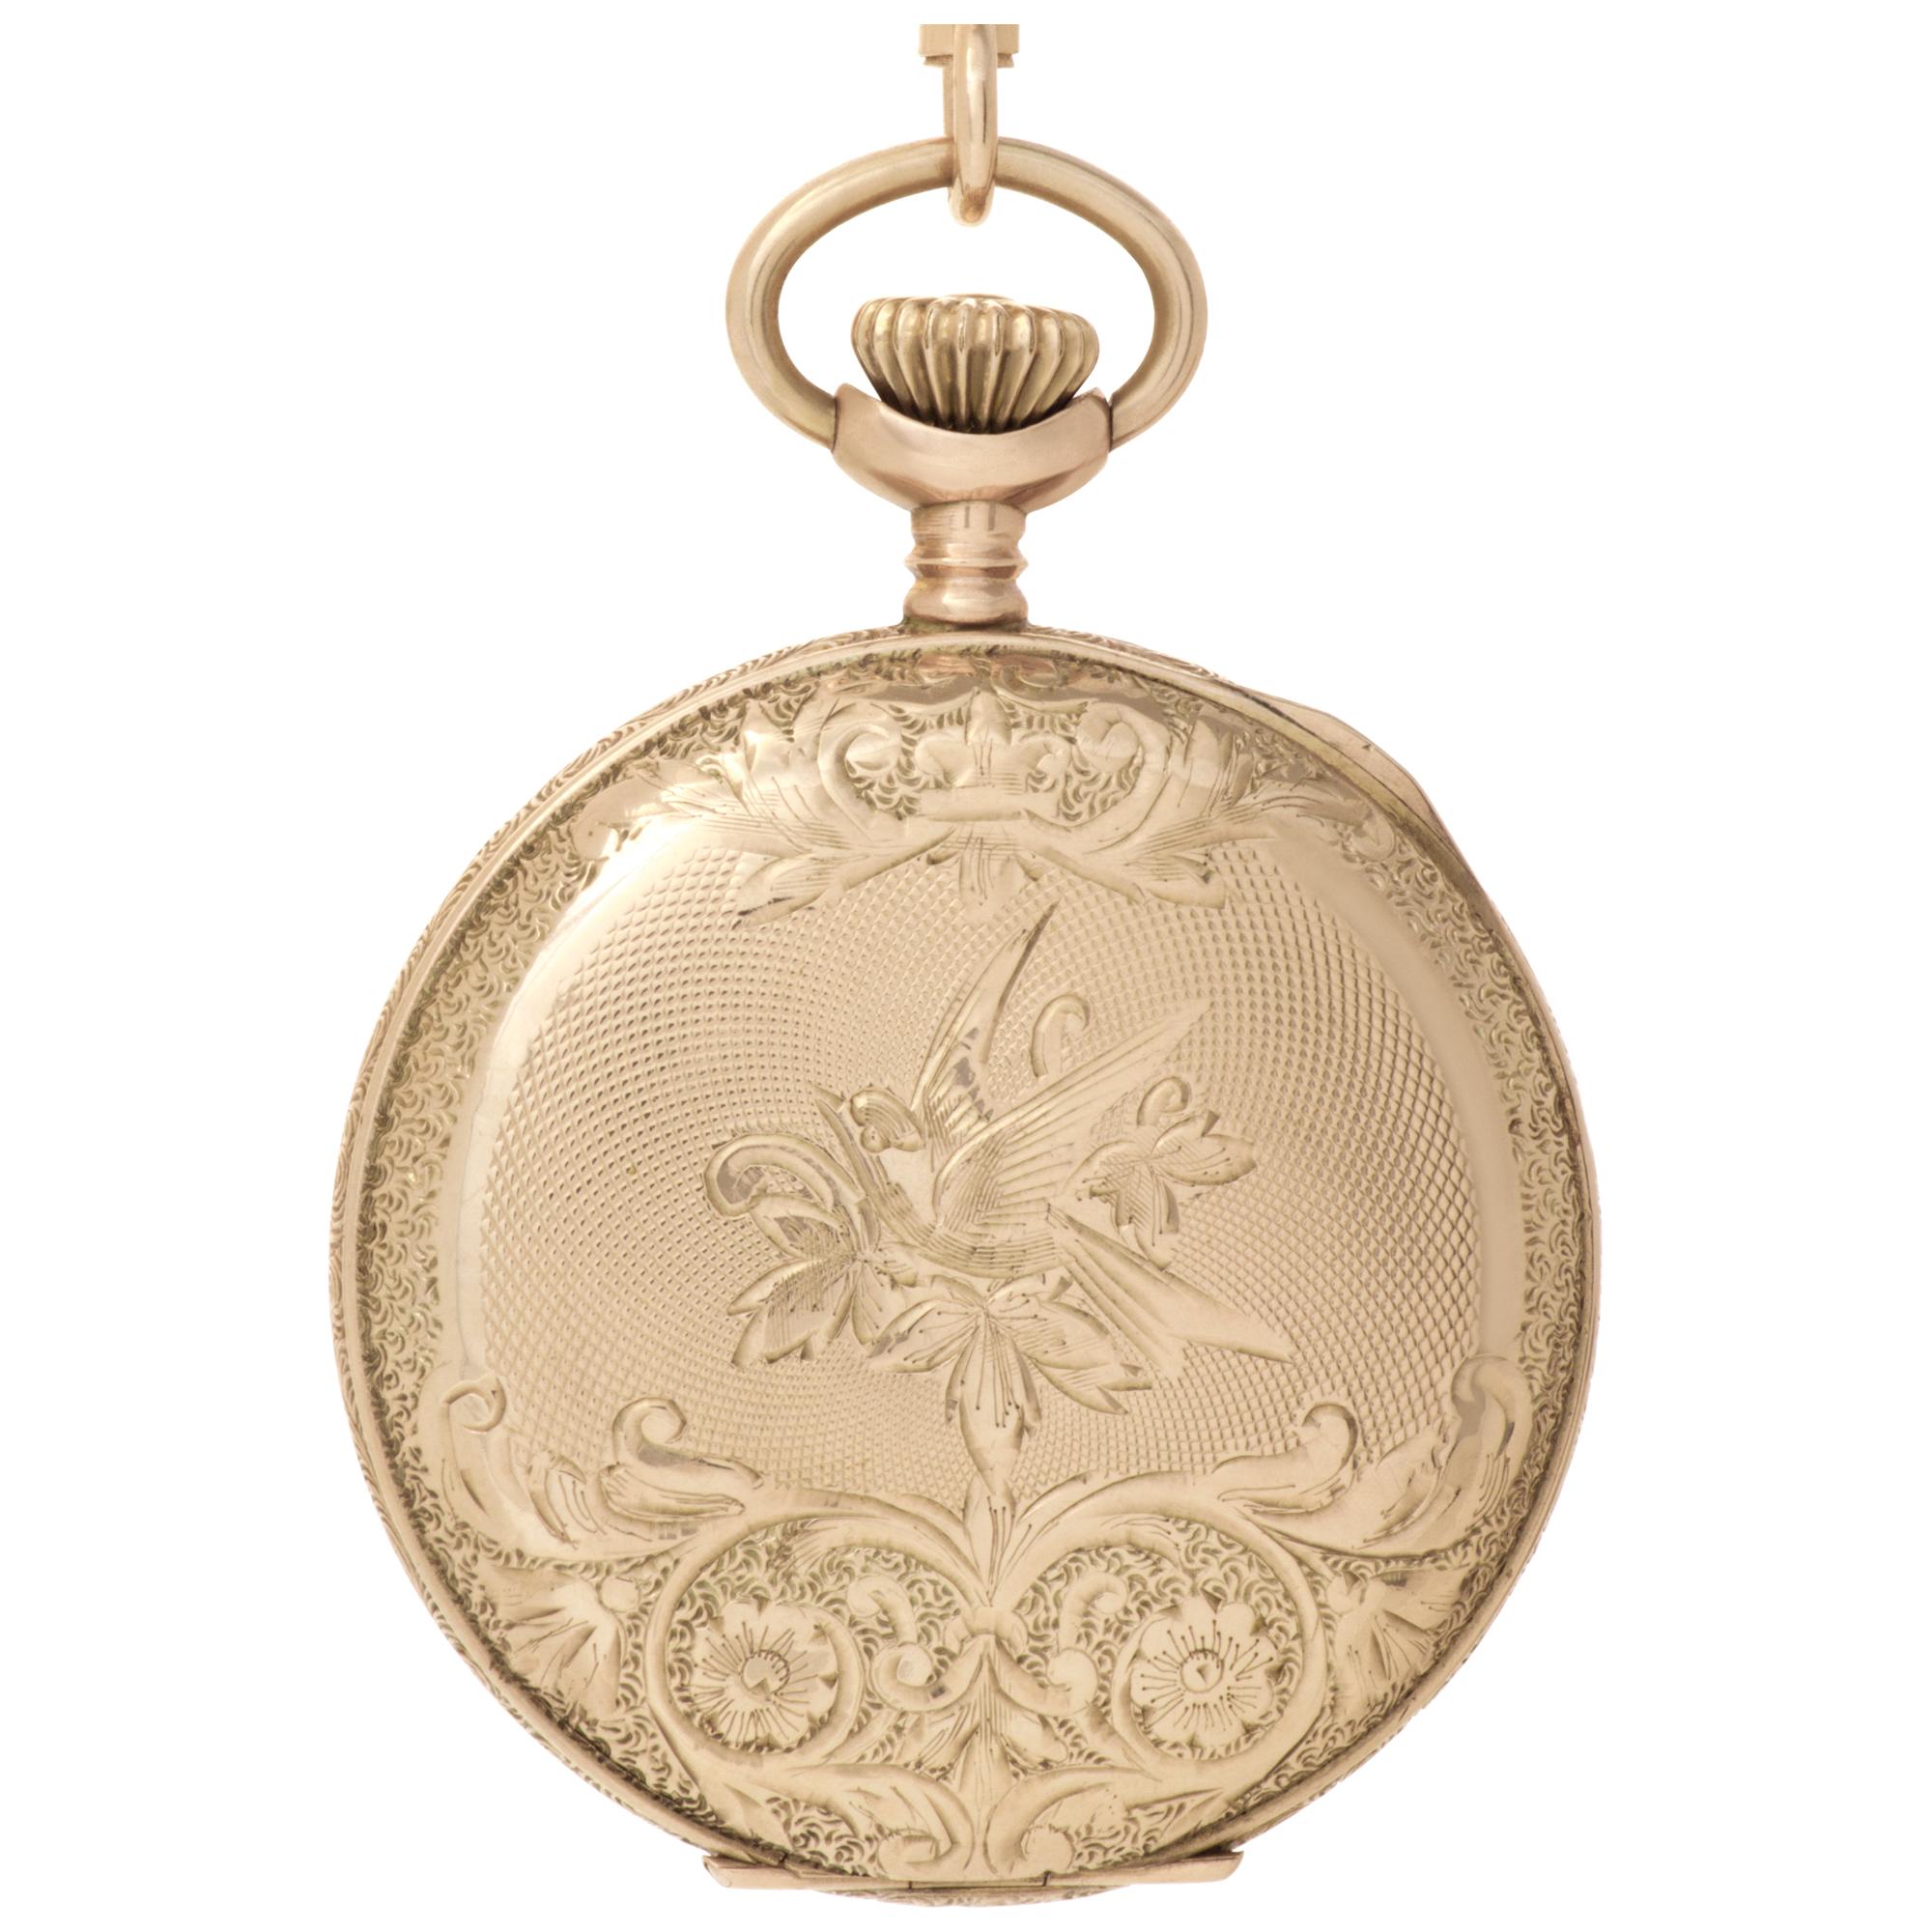 Waltham pocket watch in 10k yellow gold. Manual. Fine Pre-owned Waltham Watch. Certified preowned Dress Waltham pocket watch watch. This Waltham watch has a Round caseback and White Roman Numeral dial.  It is  Certified Authentic and comes backed by